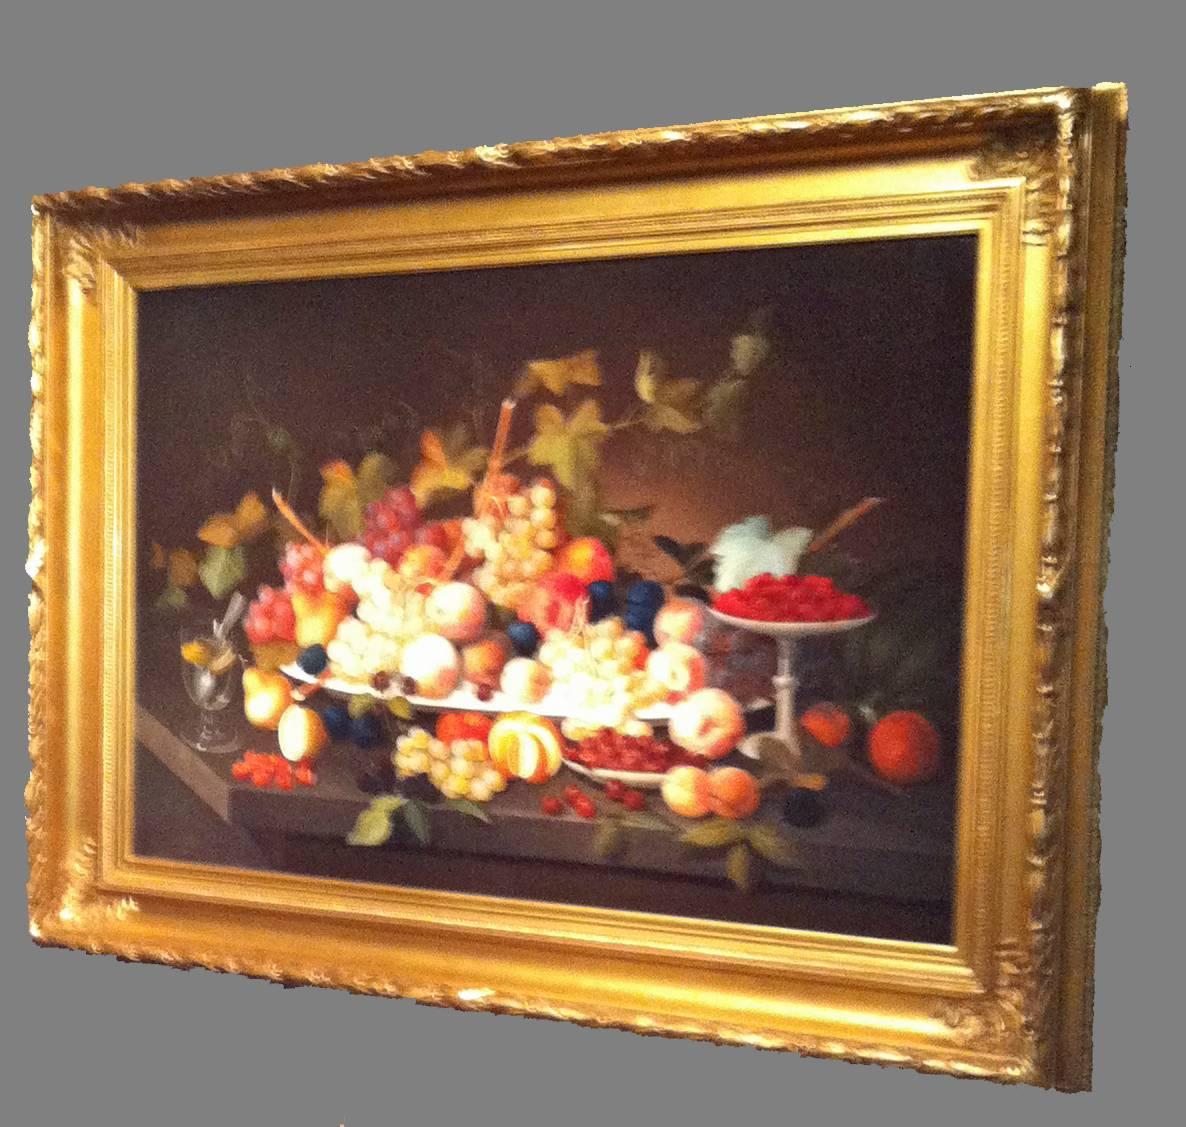 American still-life painting.
Still Life with Fruit on a Platter.
Severin Roesen & Studio,
New York,
circa 1850.

Dimensions: Frame 35 3/4 inches x 49 inches, picture sight 25 3/4 inches x 39 1/2 inches.

The attribution has been made by the